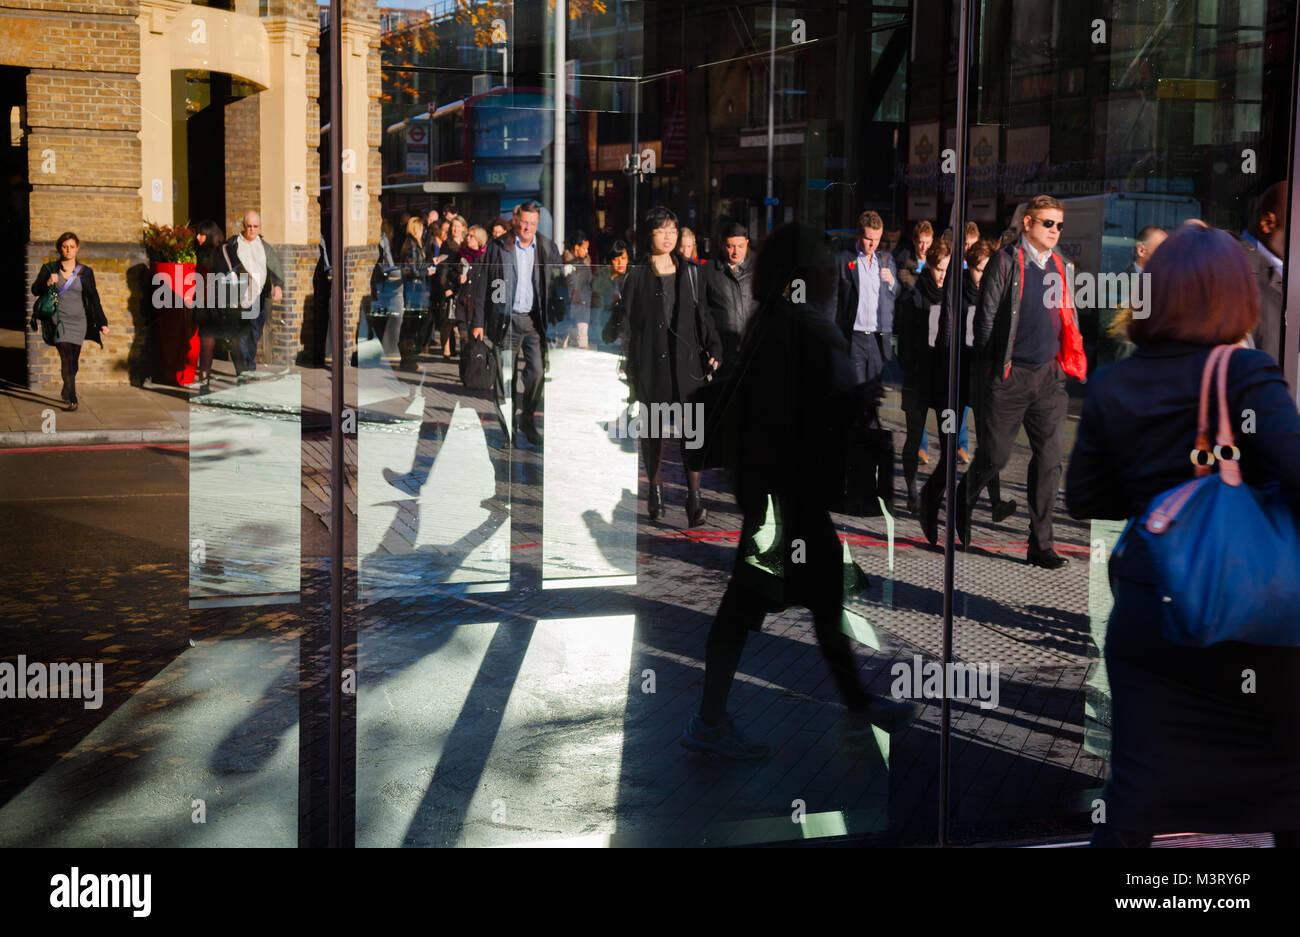 LONDON, UK - NOV 1, 2012: Pedestrians reflecting in an office building window — busy city life concept Stock Photo